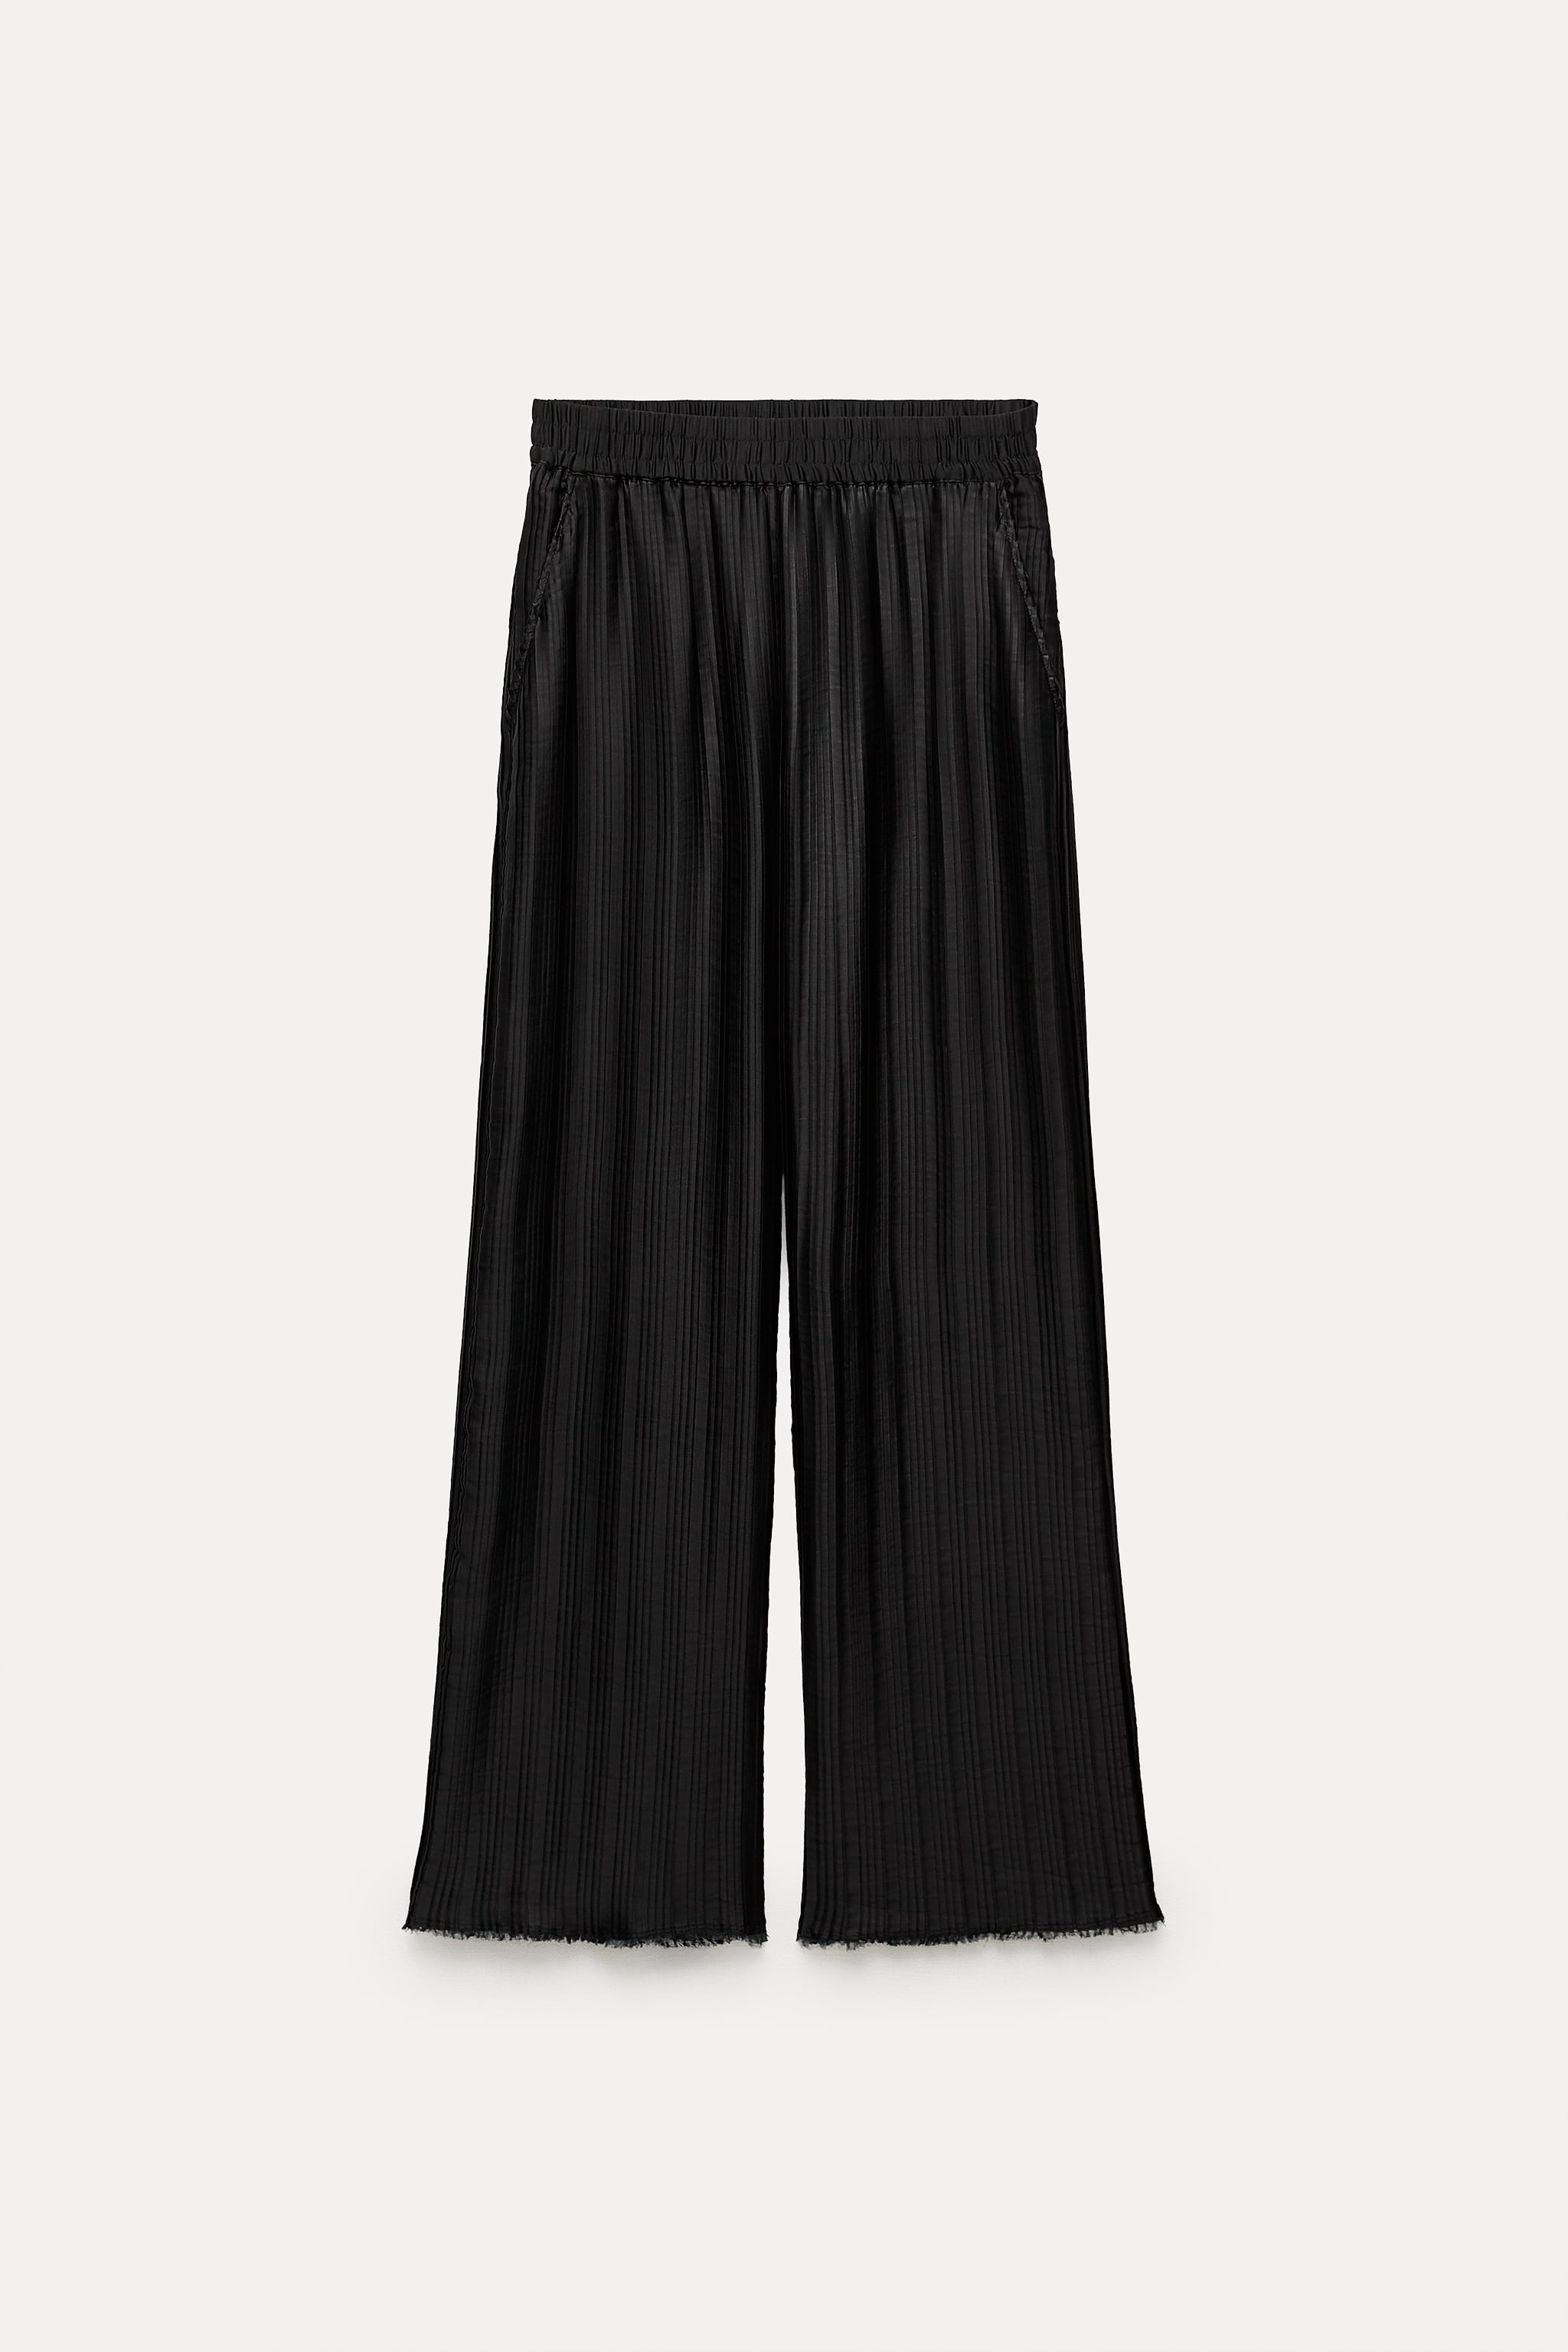 ZW COLLECTION PLEATED PANTS